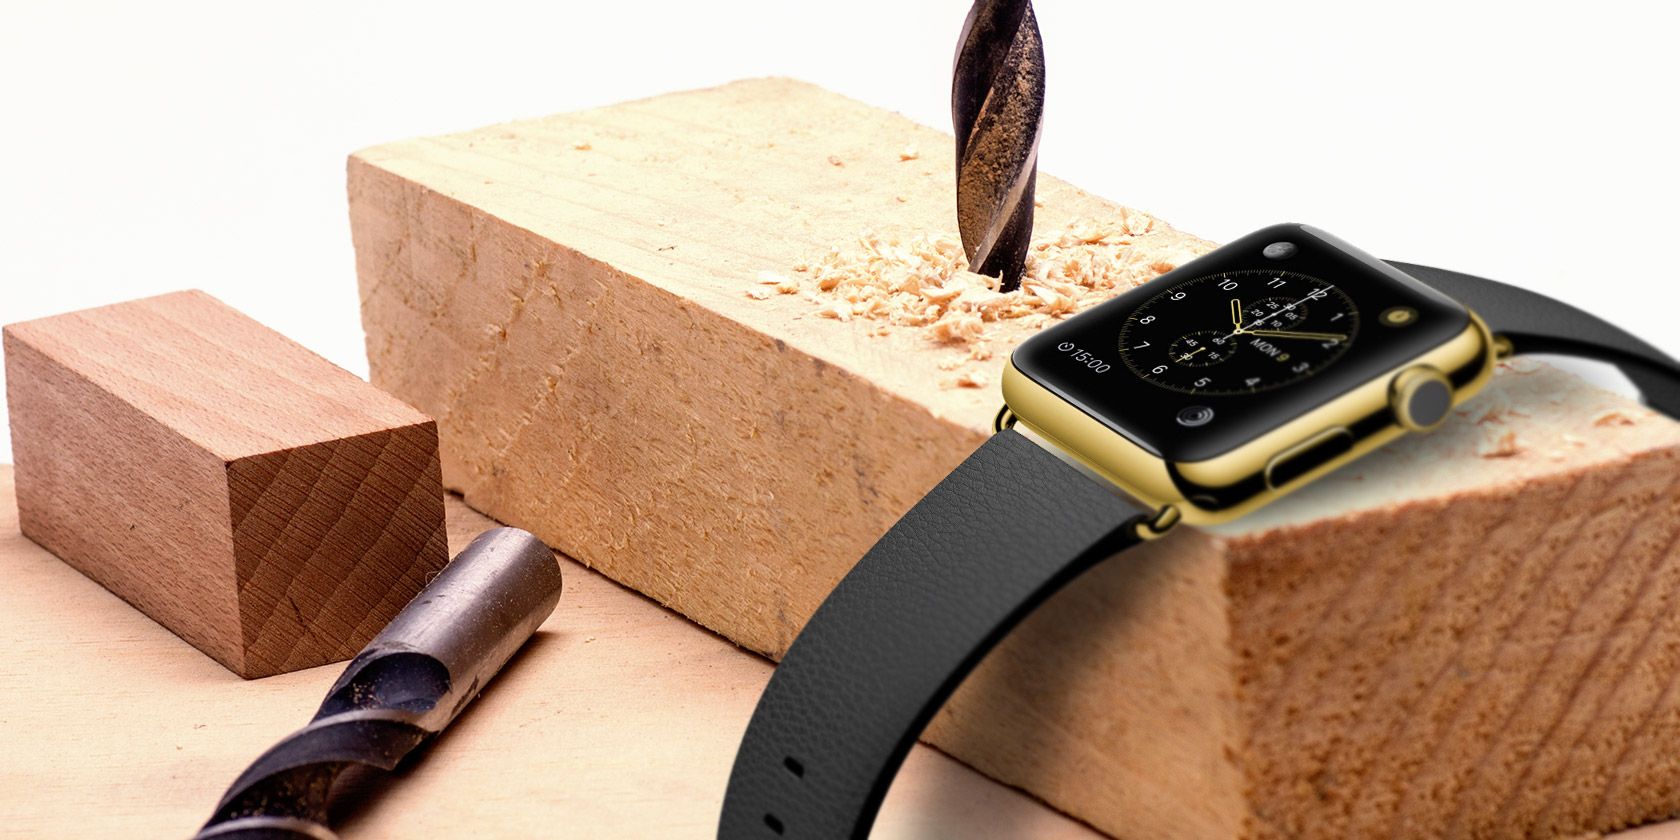 Making a DIY Apple Watch stand